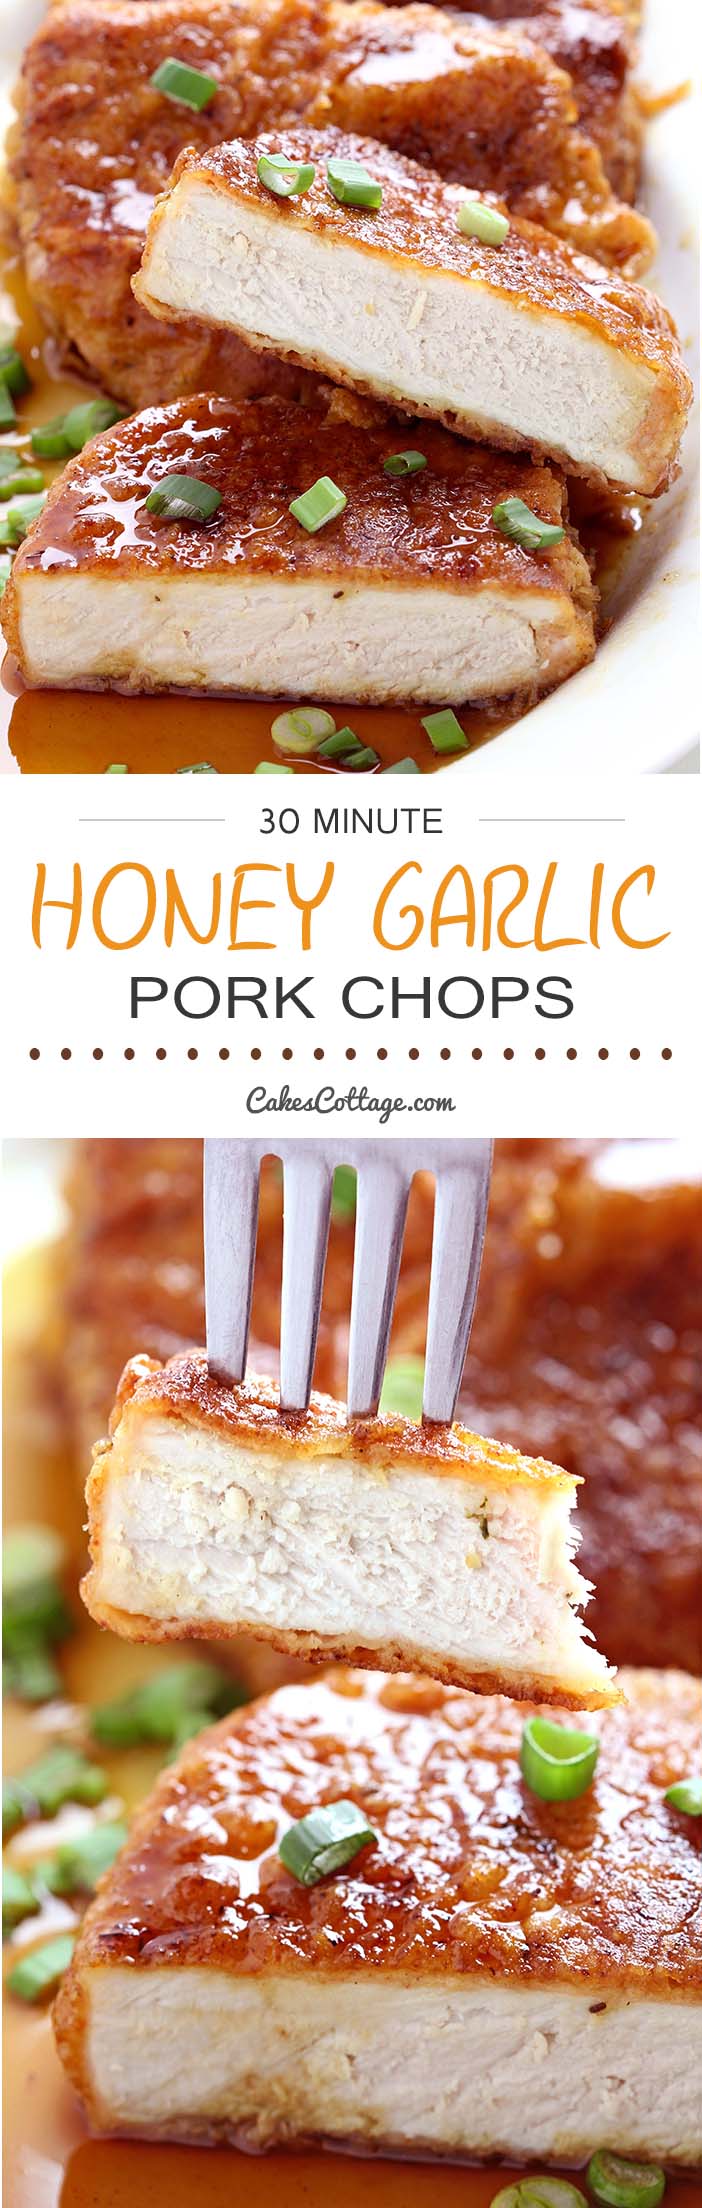 Double dipped and deliciously crunchy pork chops, coated in a sticky honey garlic sauce that is out of this world. So good, you’ll want to use this sauce on everything!